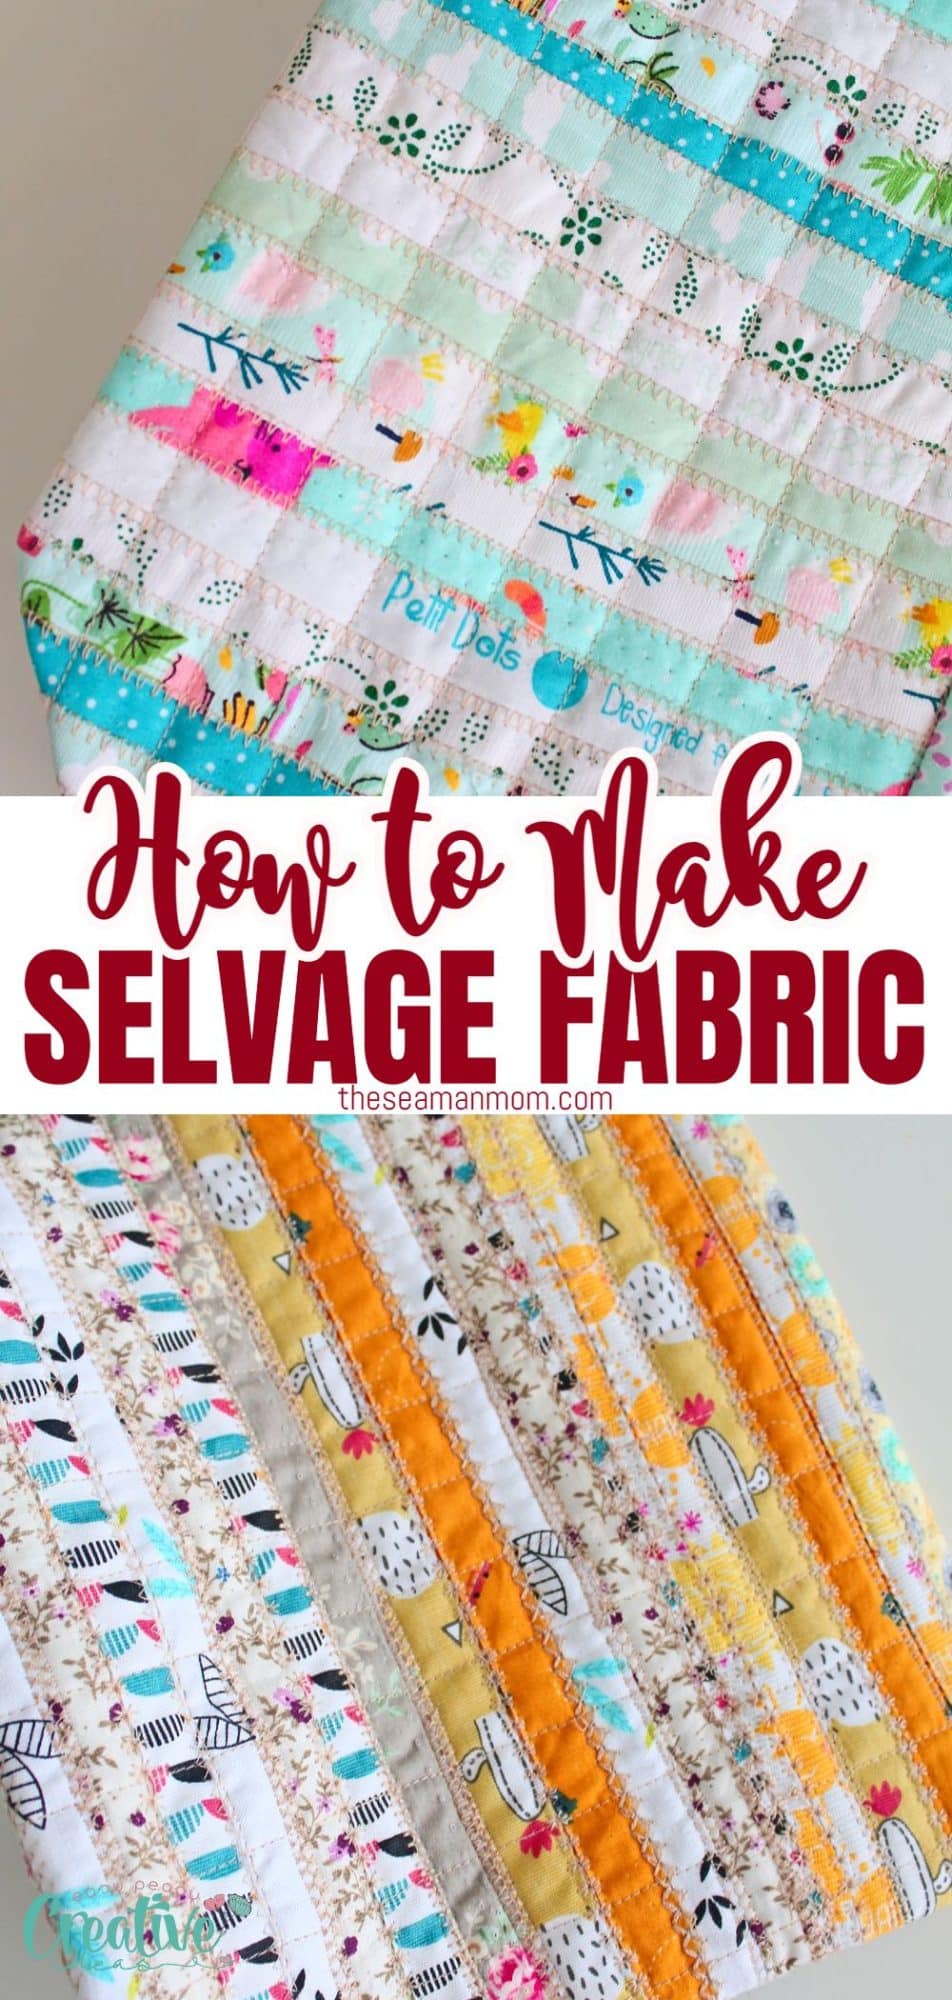 How to make selvage fabric